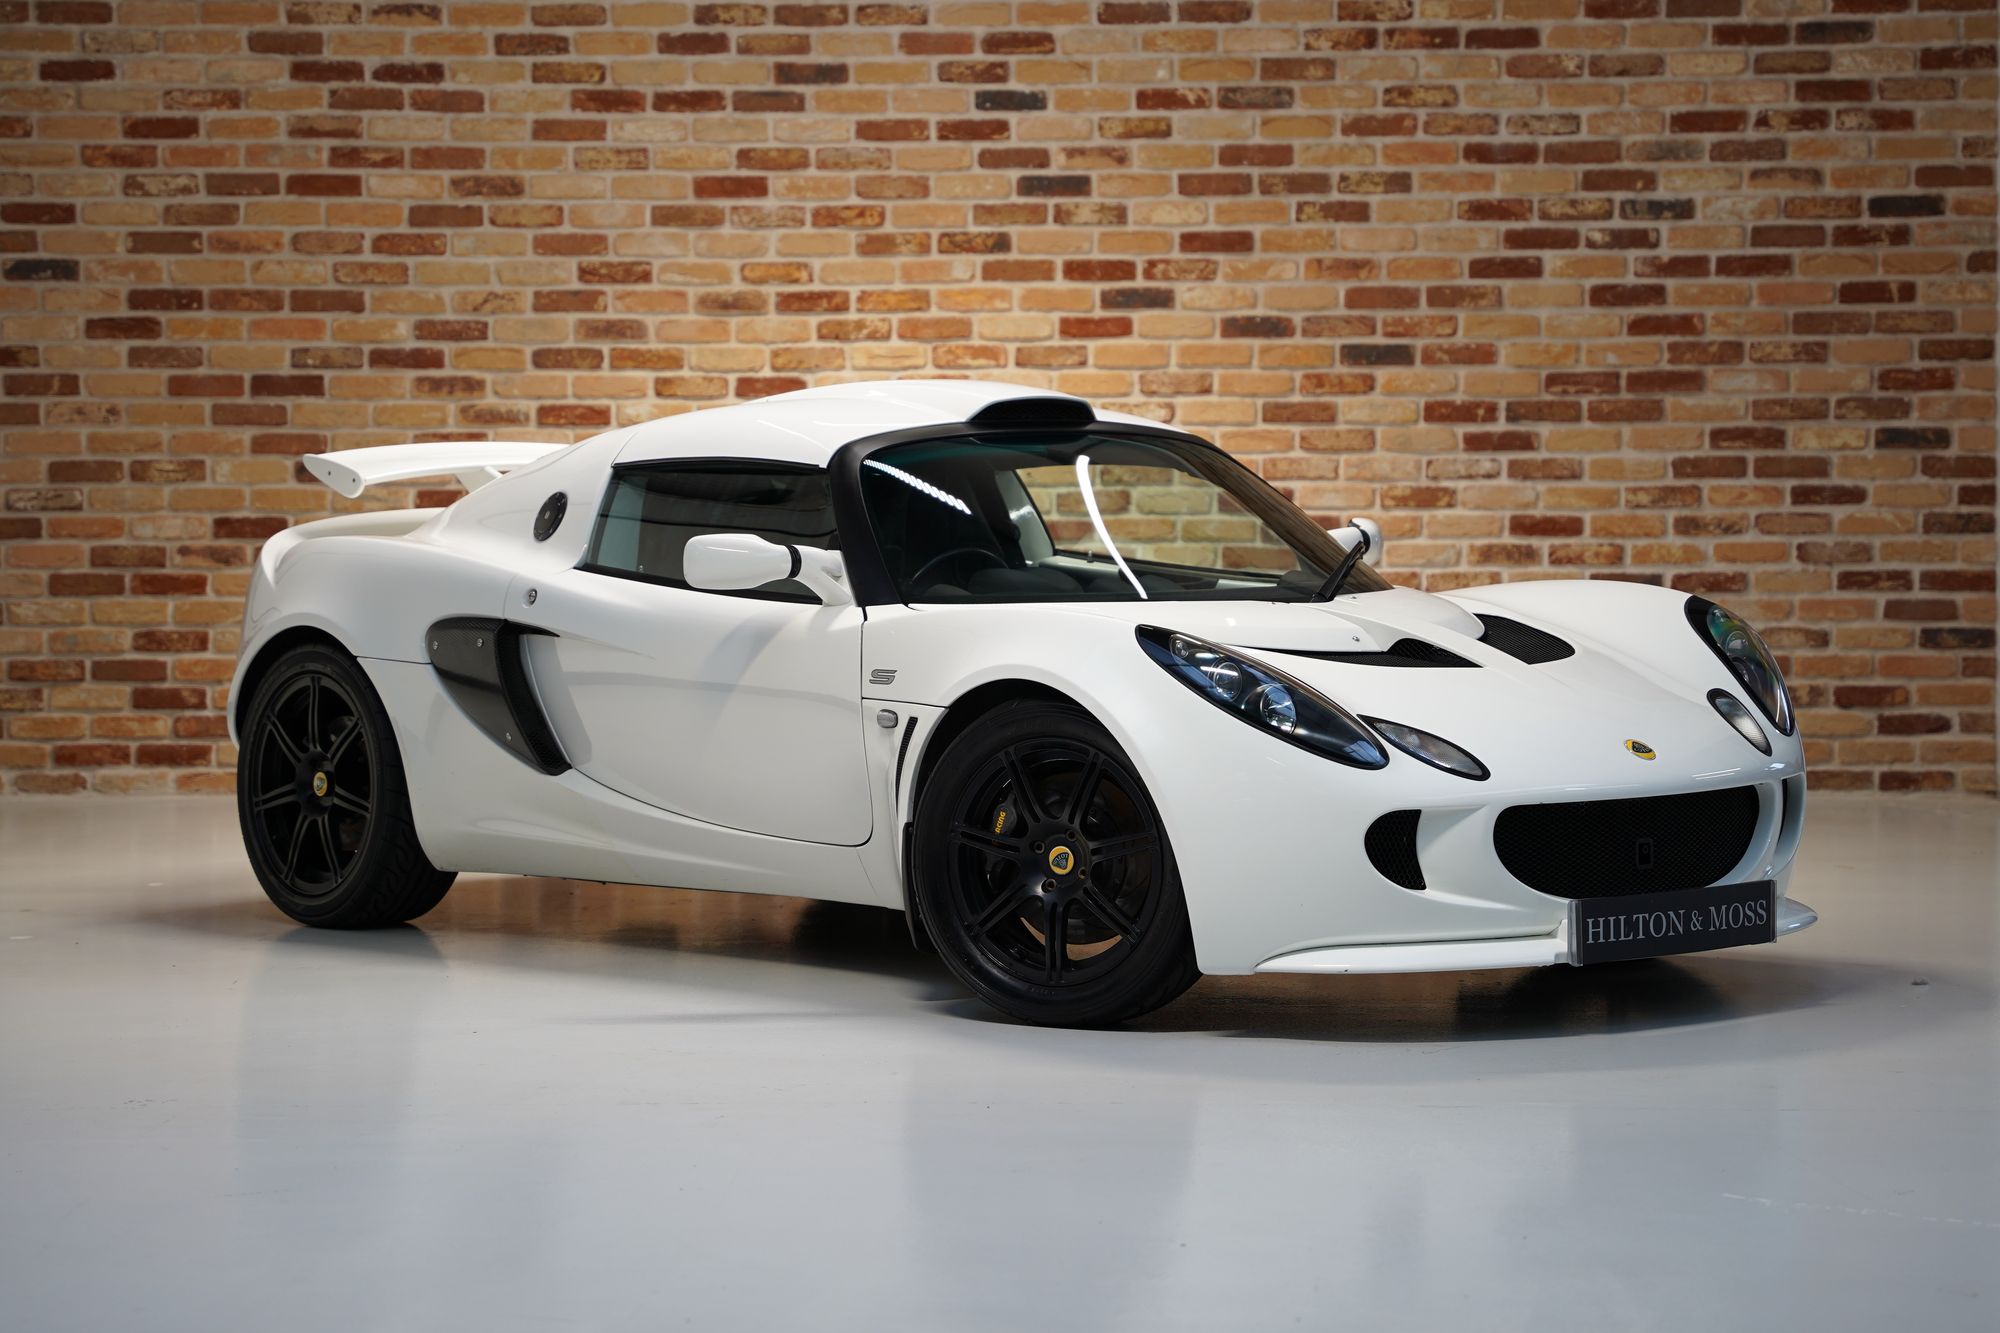 2008 Lotus Exige S Performance Previously Sold | Hilton & Moss